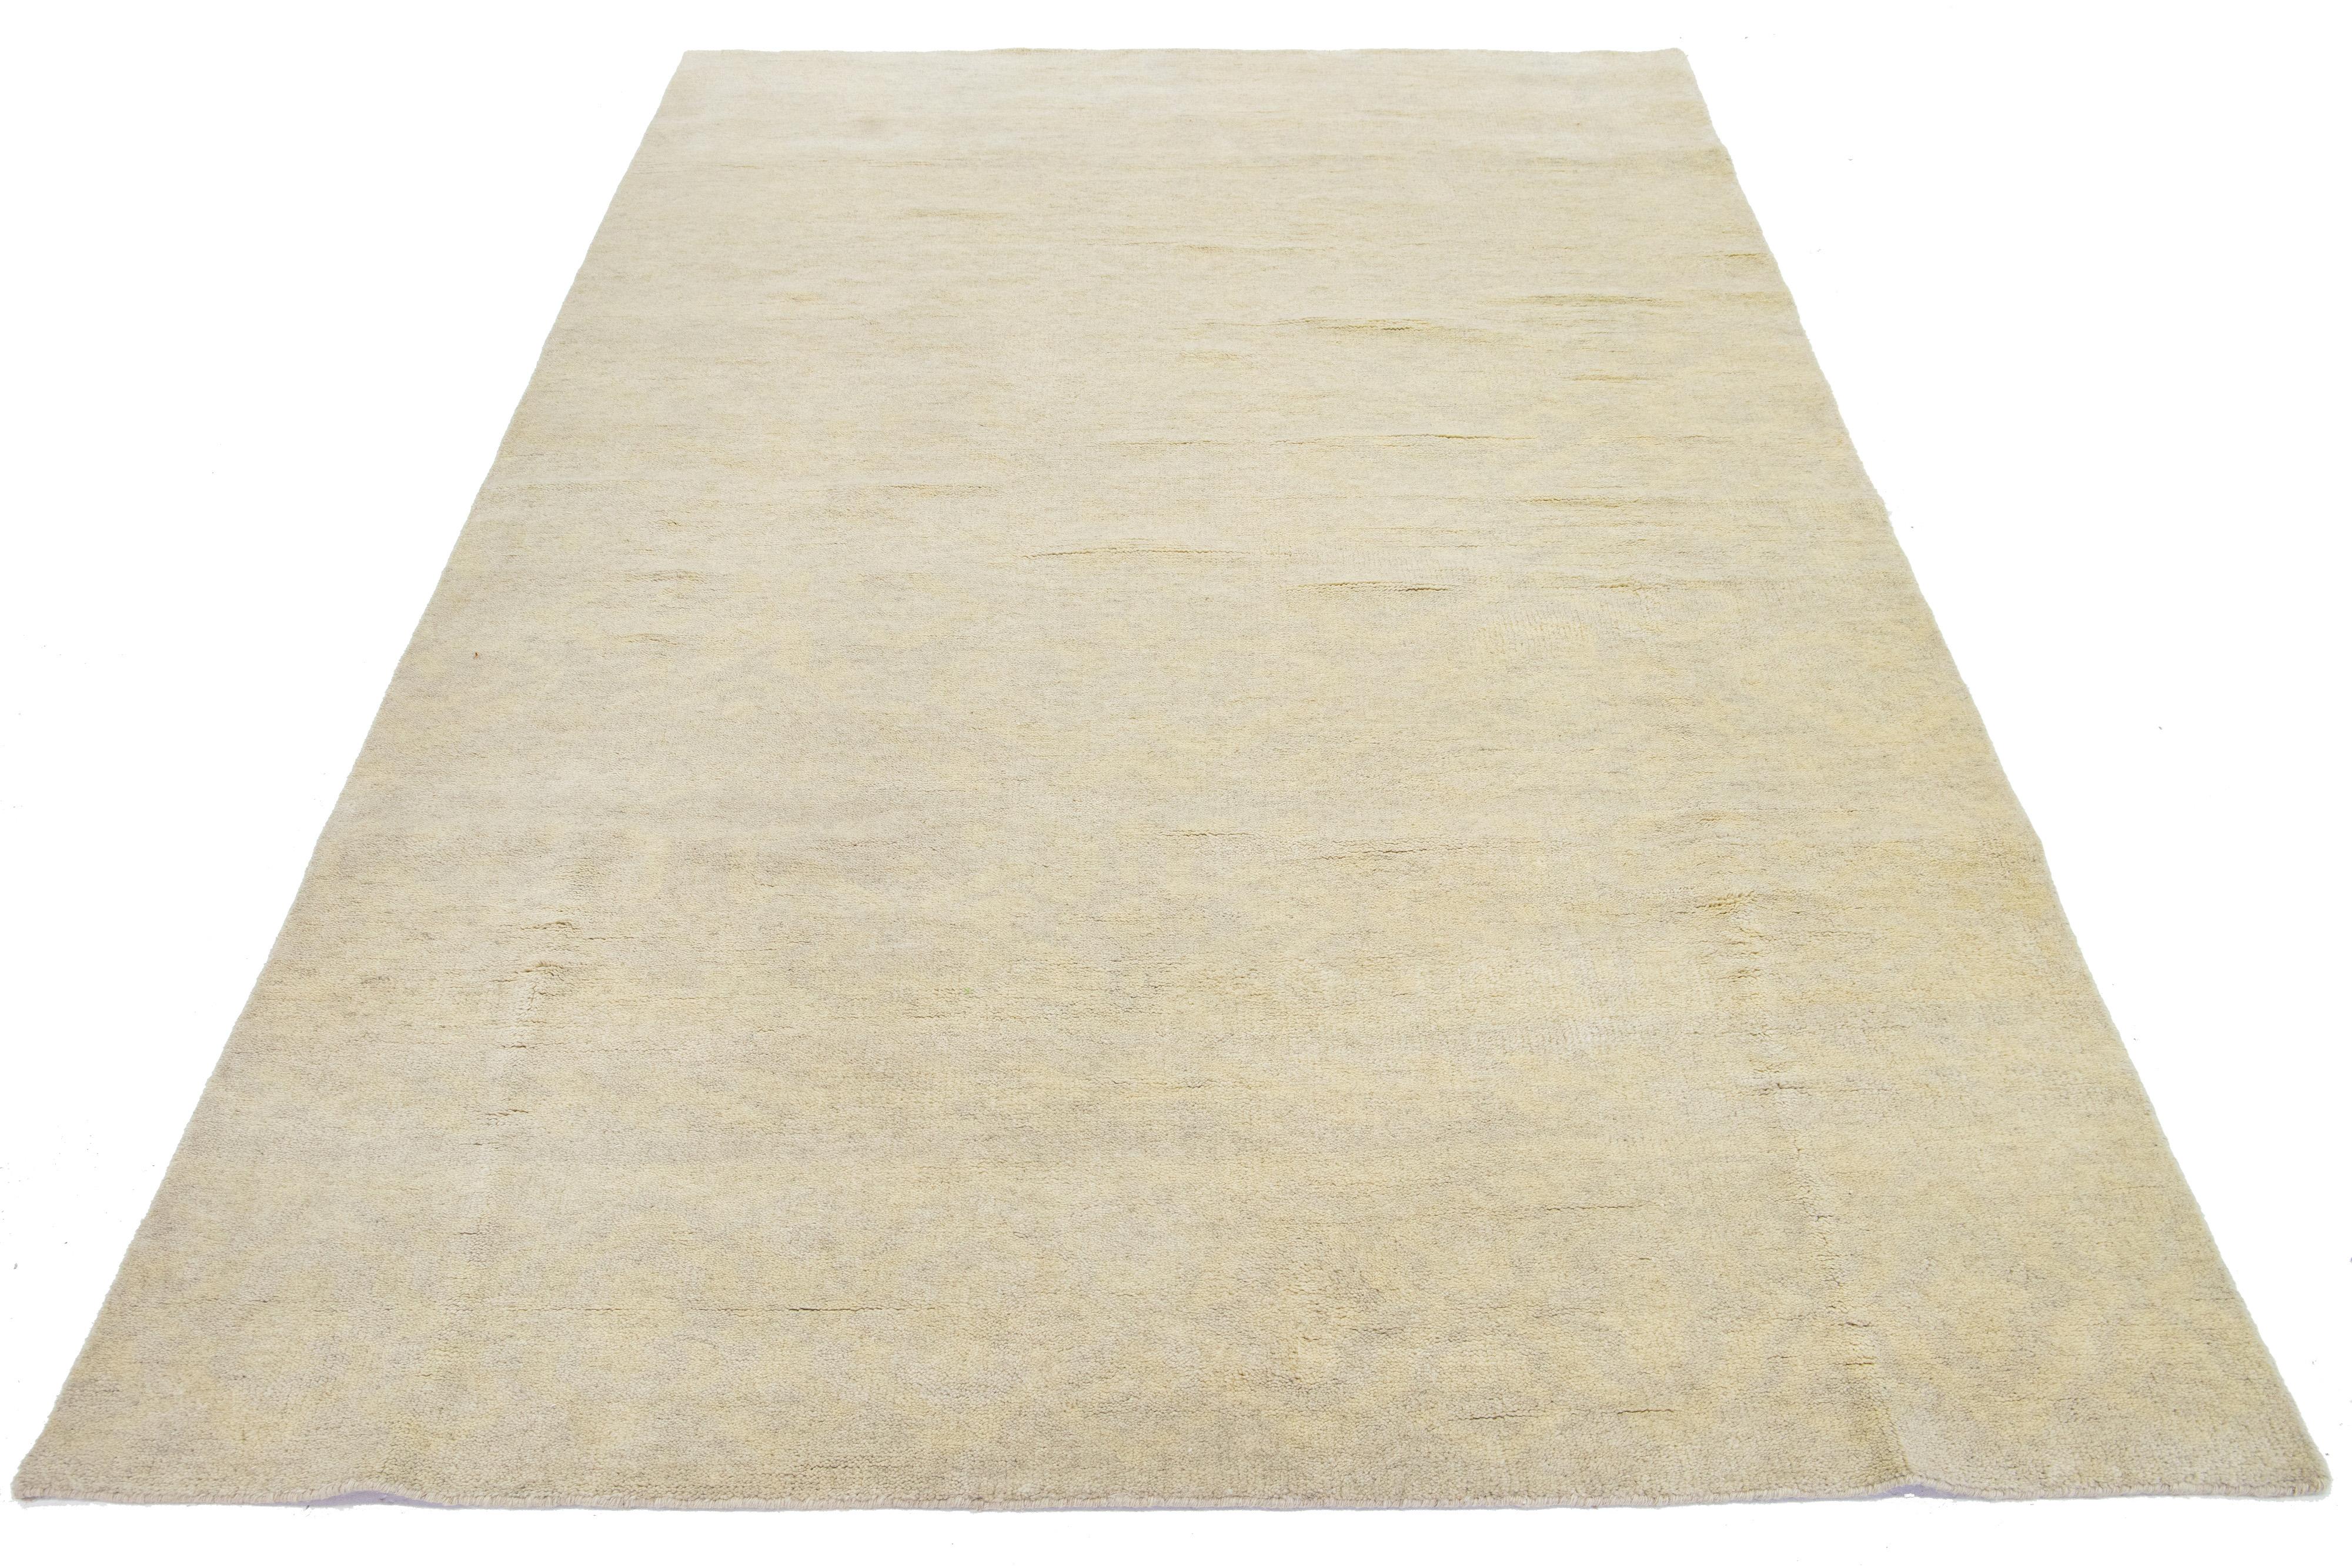 The contemporary Khotan wool rug from India. The design showcases a deep beige base with intricate cream-colored trellis patterns. These include eye-catching geometric elements.

This rug measures 6'6